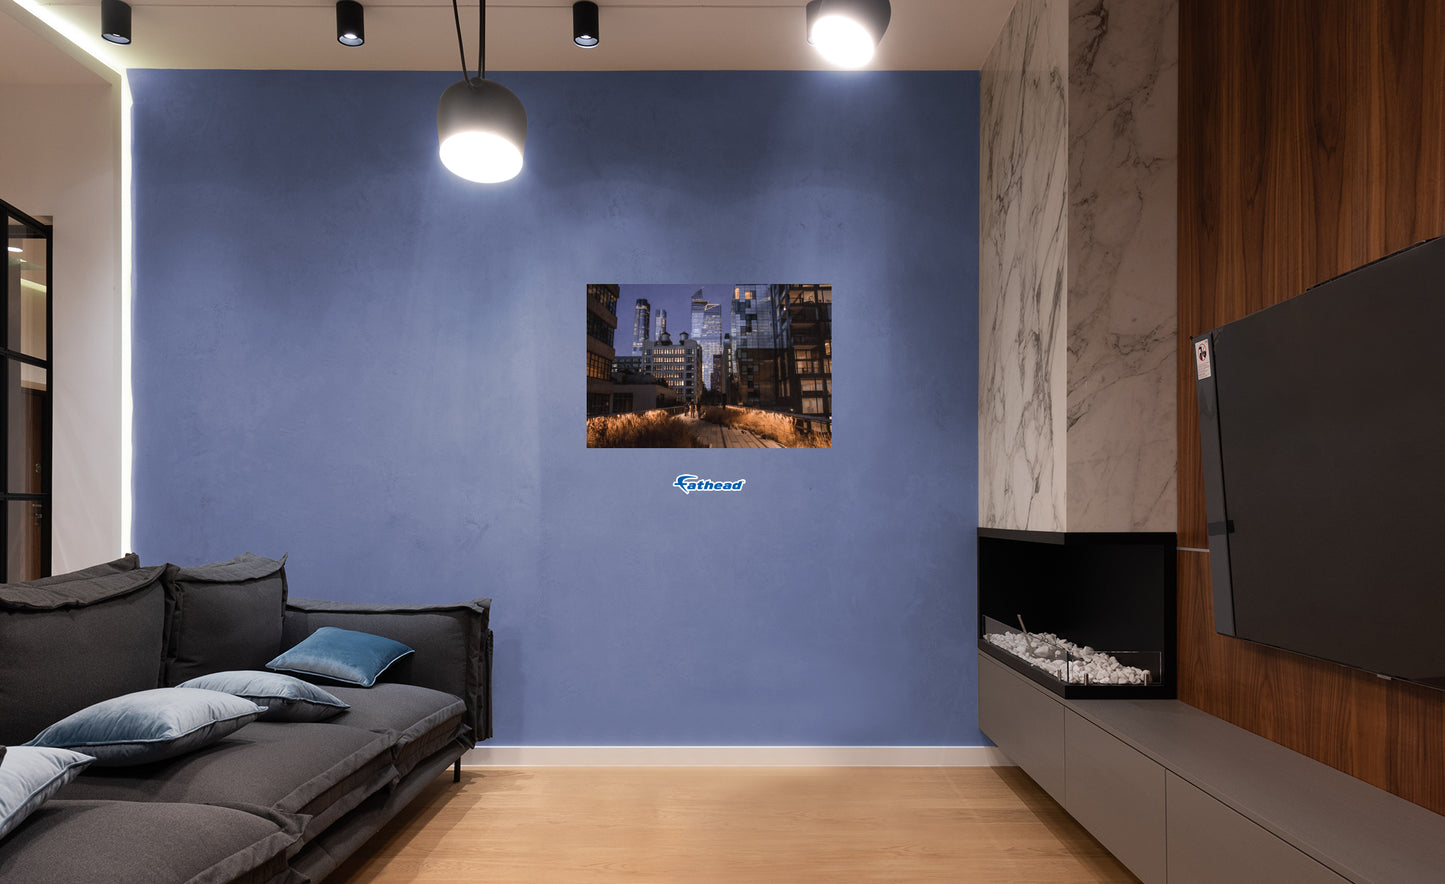 Generic Scenery:  Night Lights Poster        -   Removable     Adhesive Decal